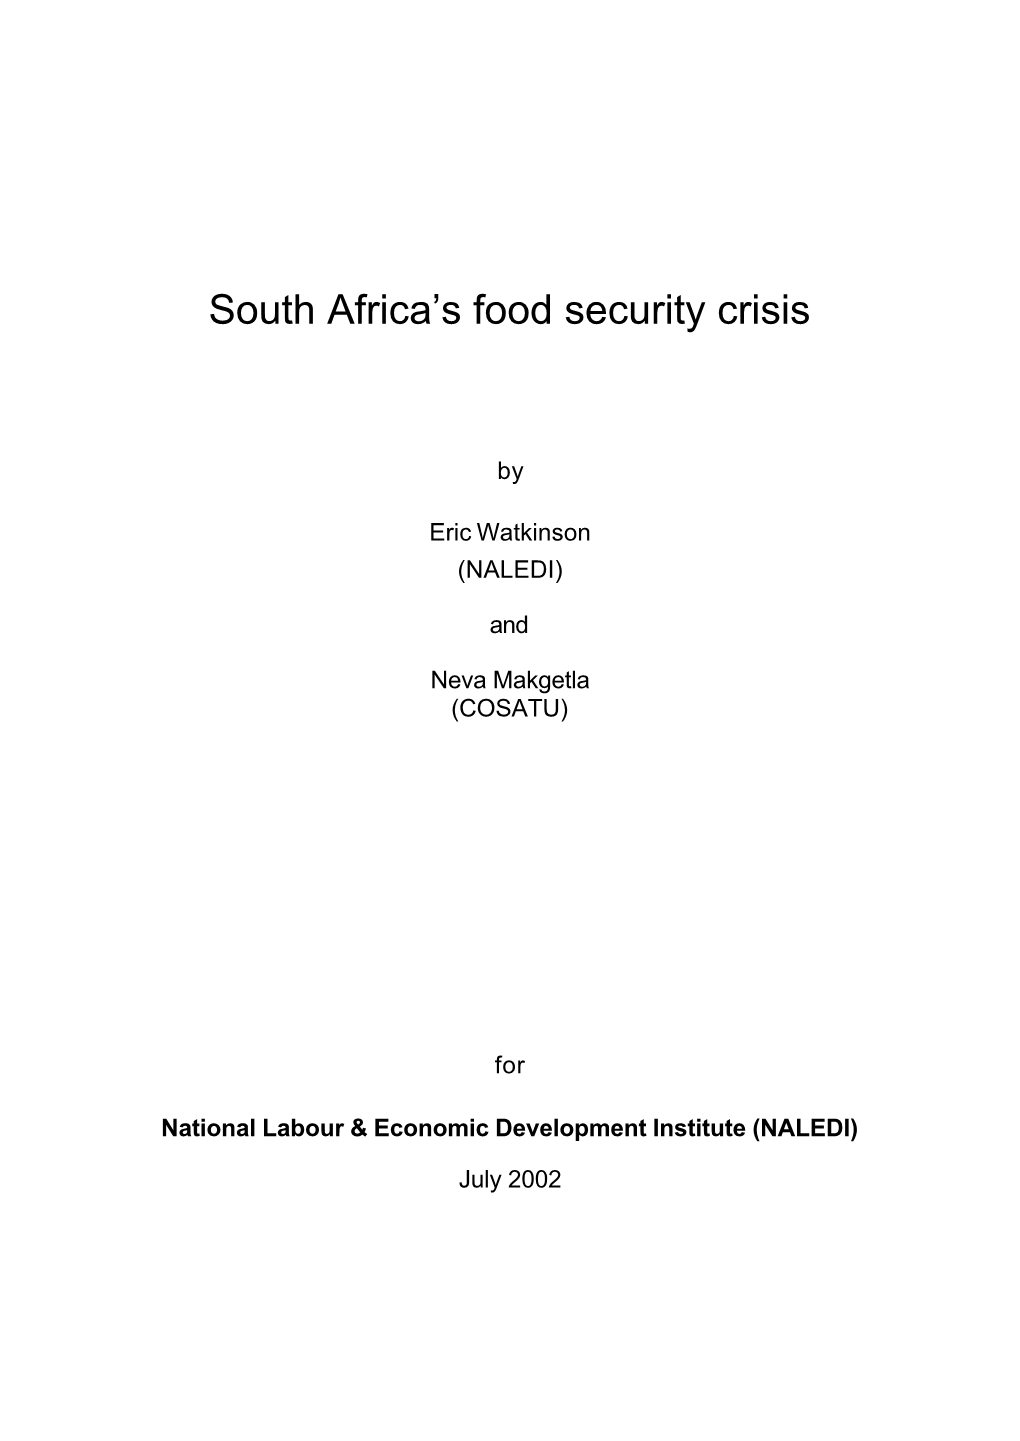 South Africa's Food Security Crisis